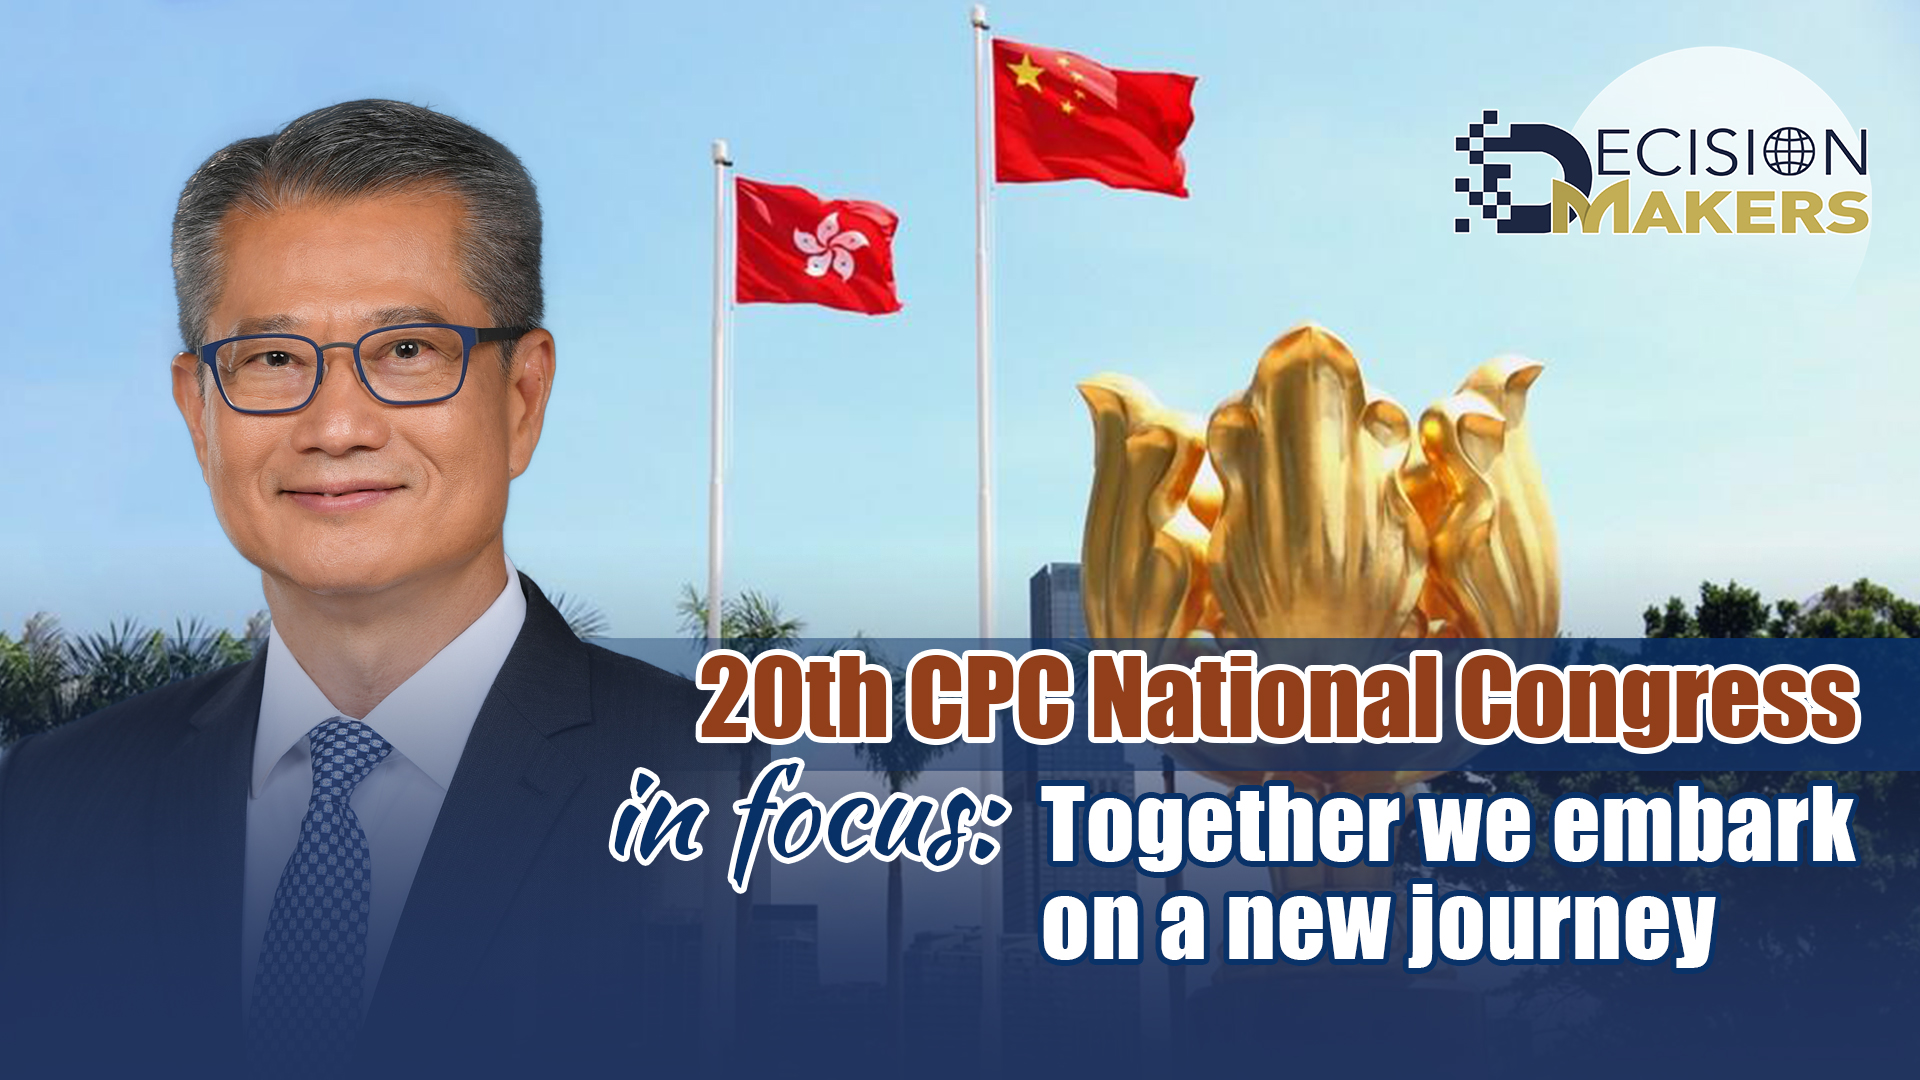 20th CPC National Congress in focus: Together we embark on a new journey